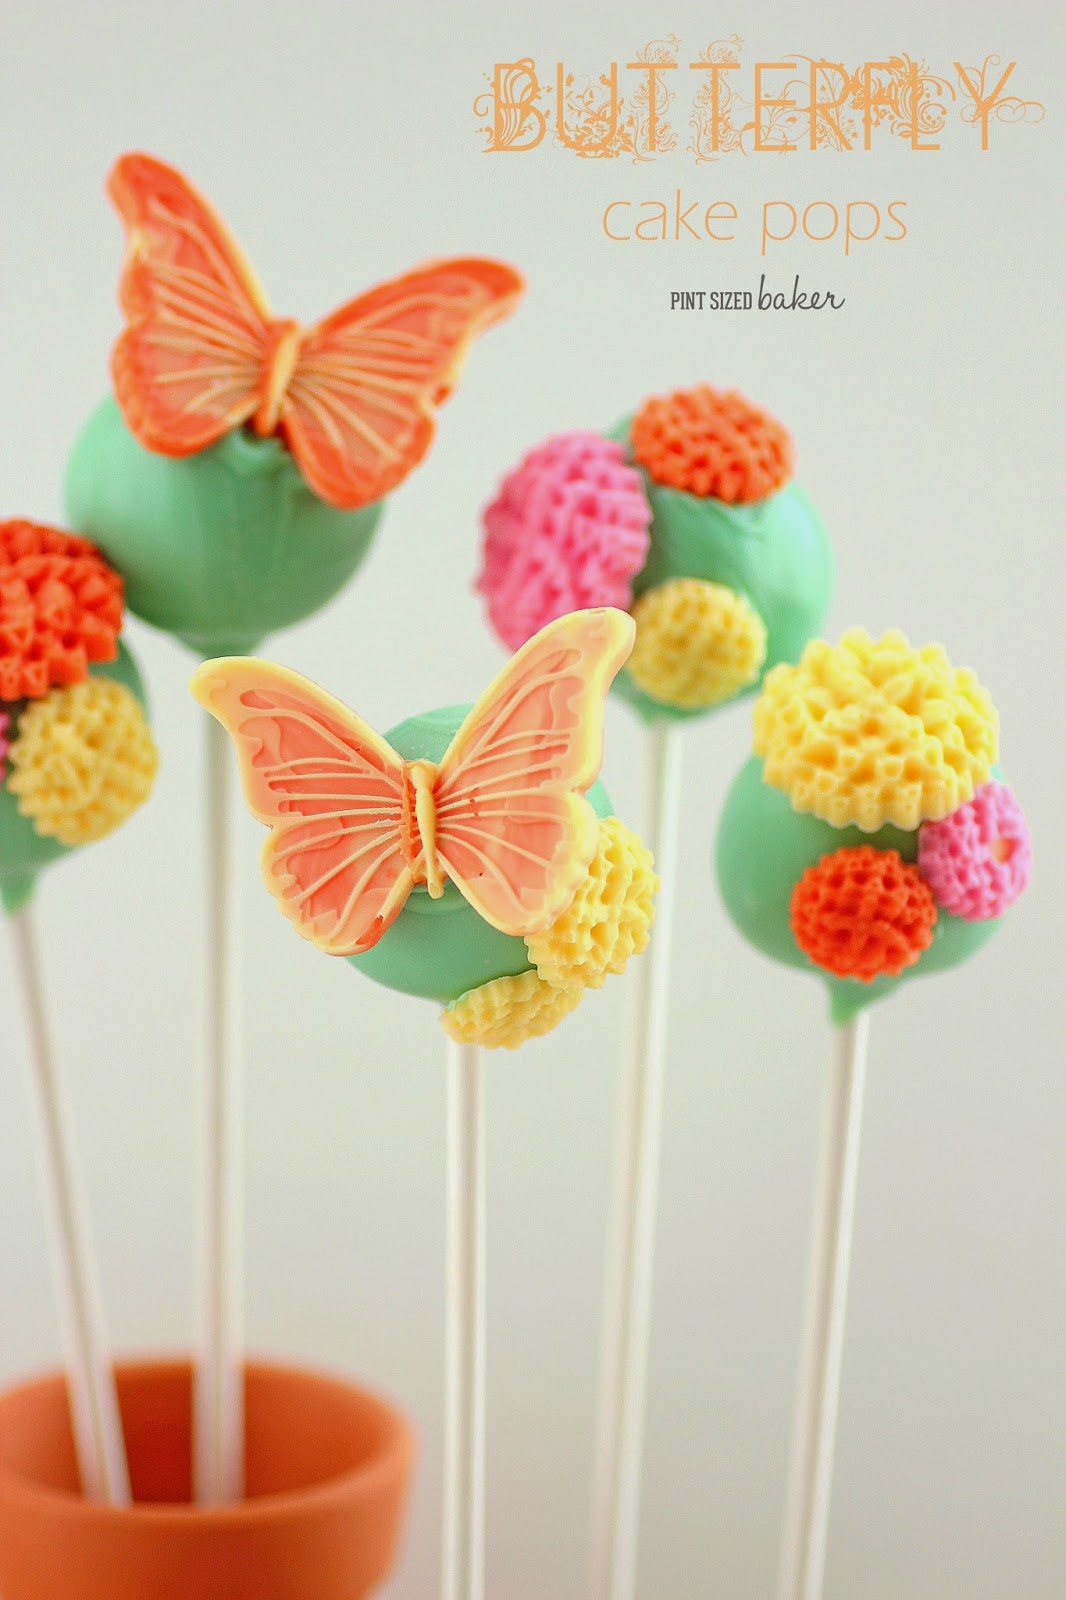 Spring time celebrations aren't complete without Butterfly Cake Pops. You can learn how to make these fun cake pops at home for your garden party.